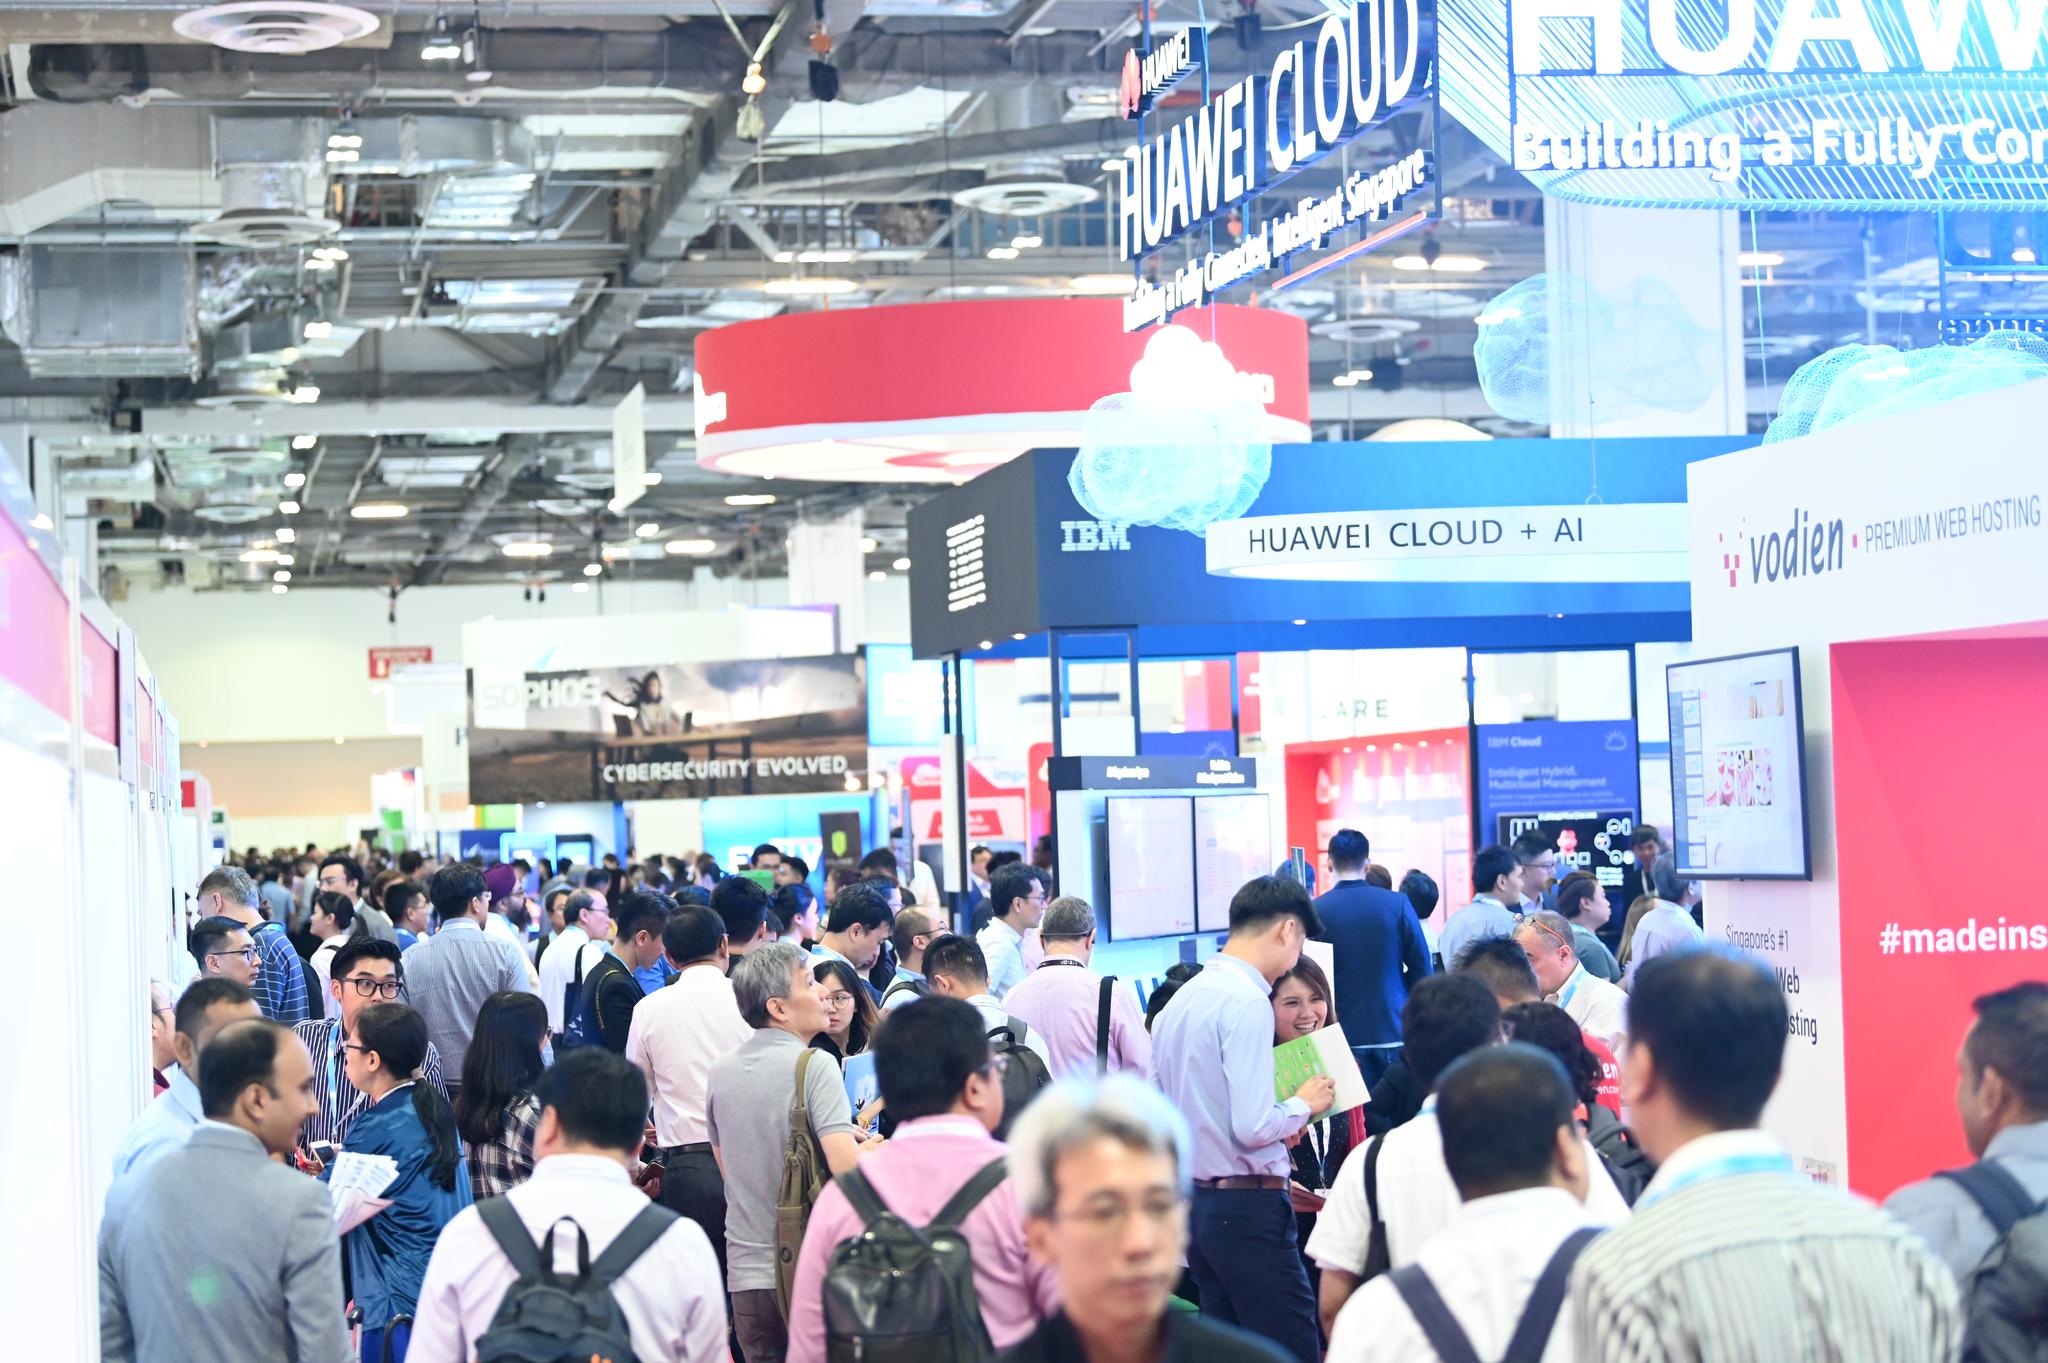 Cloud Expo Asia received over 21,000 attendees across two levels for